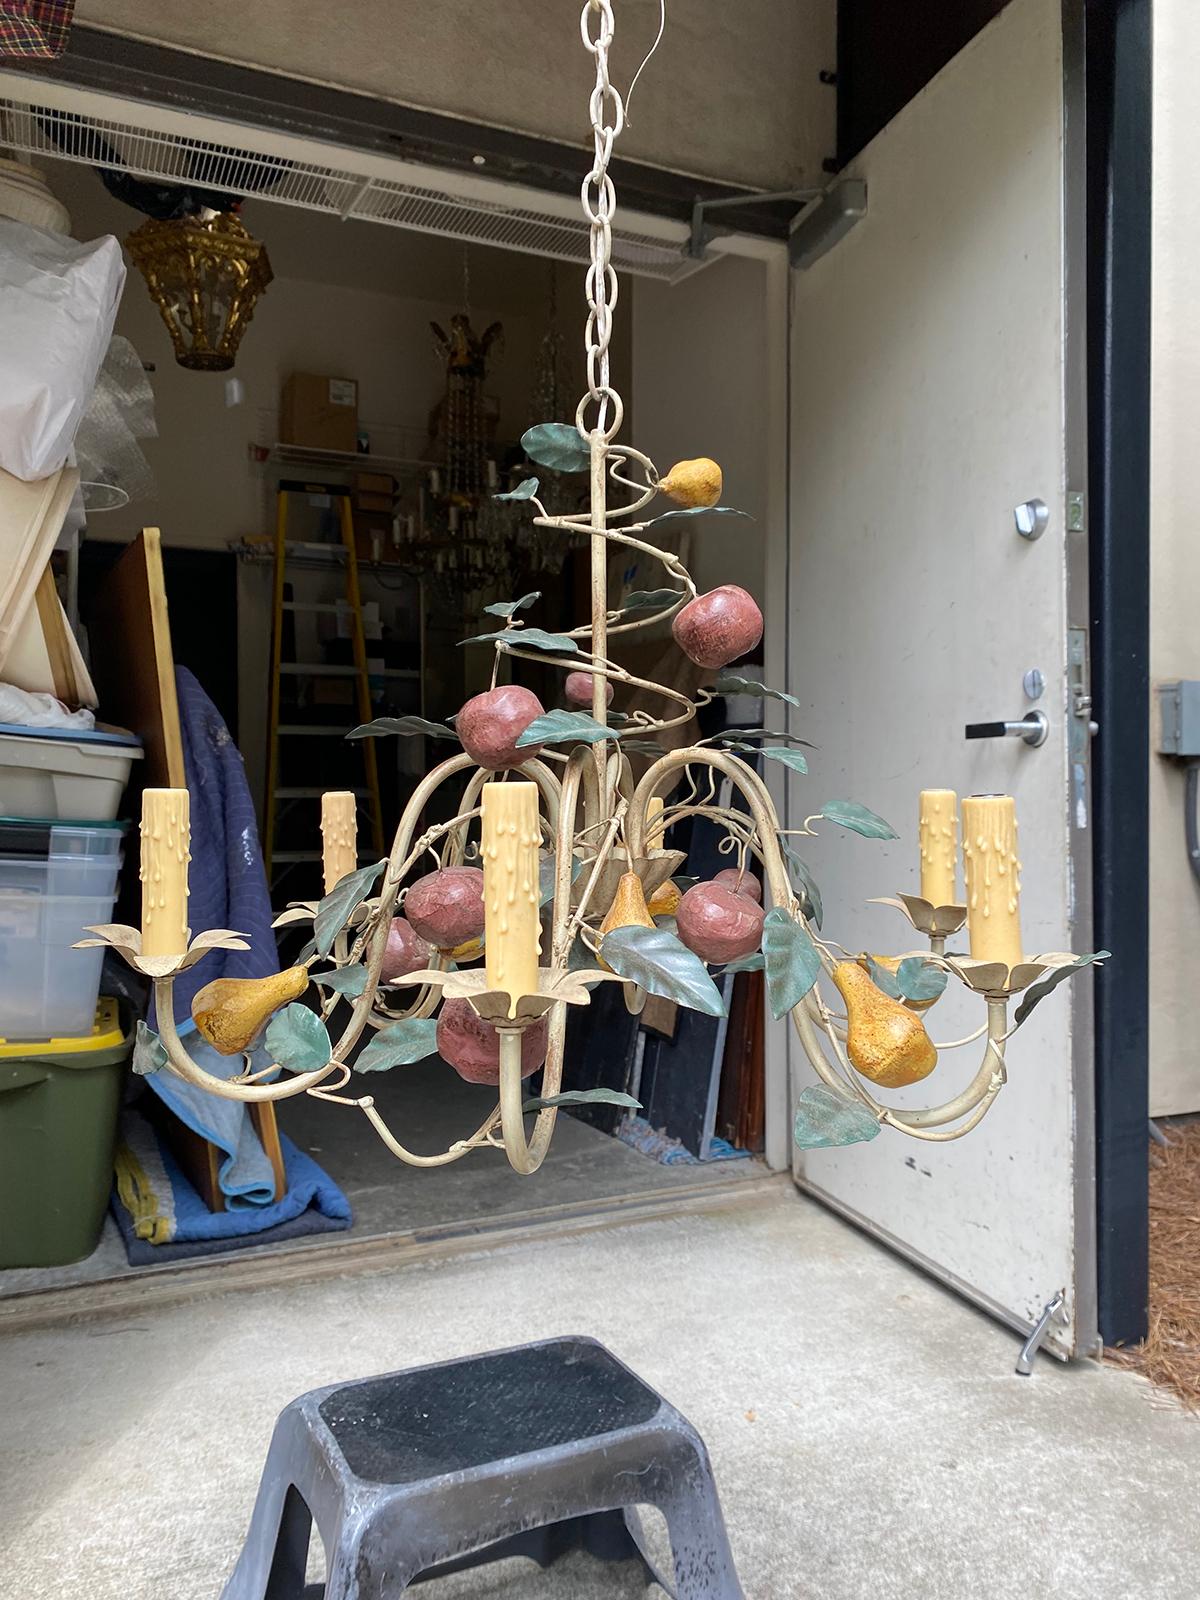 20th century tole six arm chandelier with fruit
New wiring.